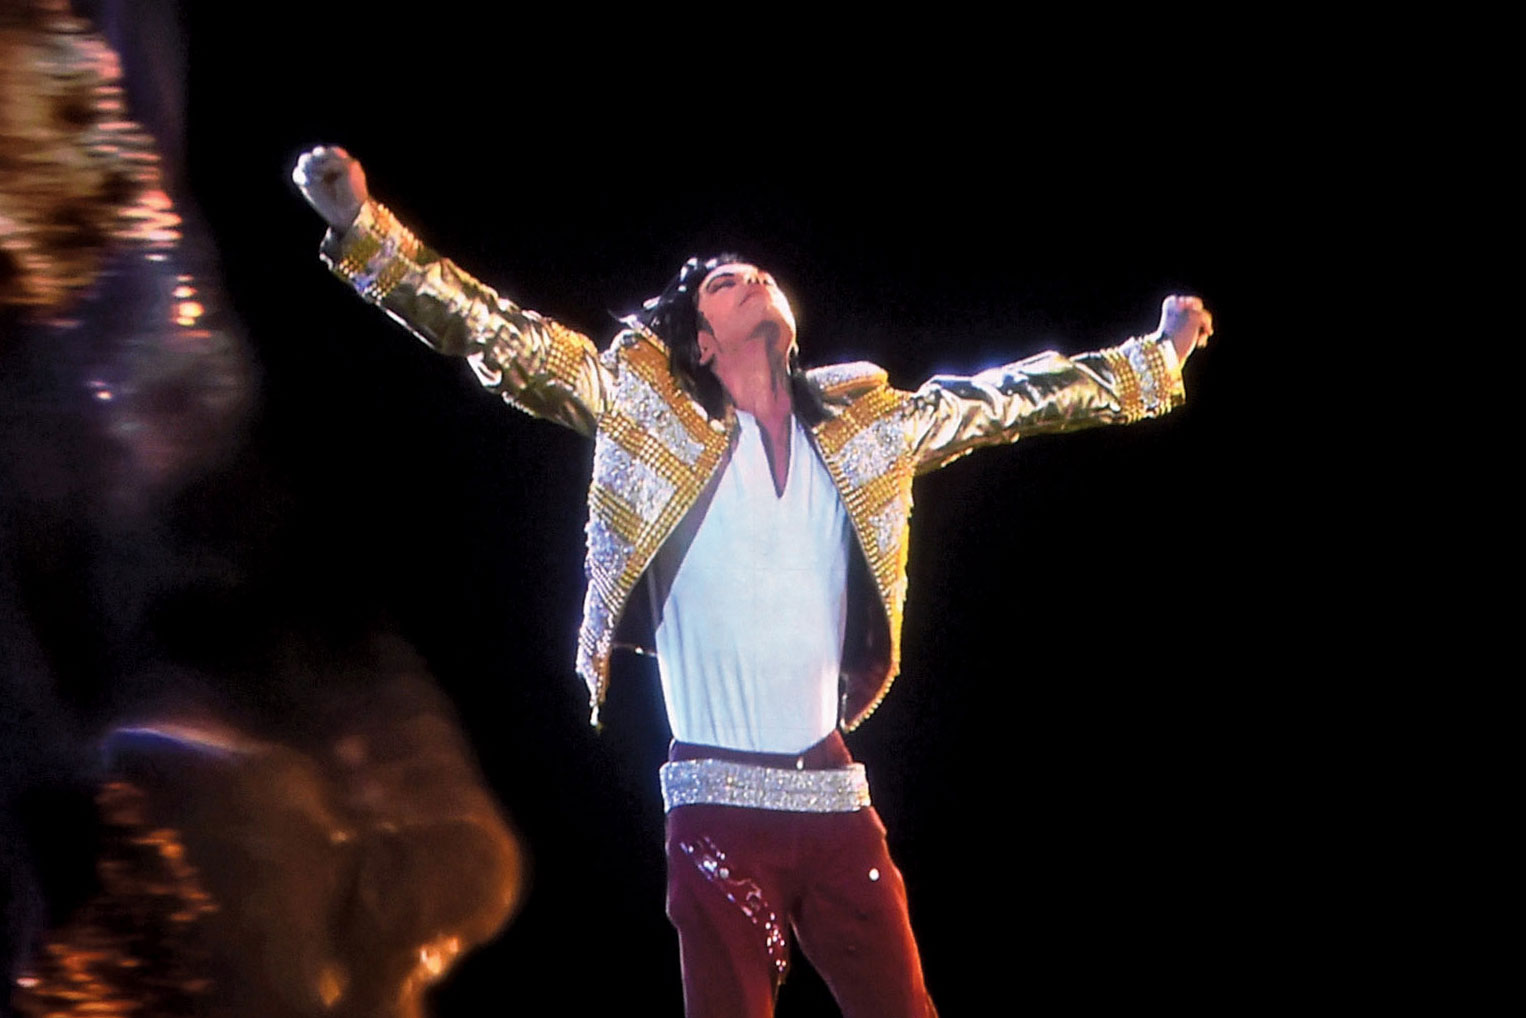 Louis Vuitton has confirmed it will pull all Michael Jackson